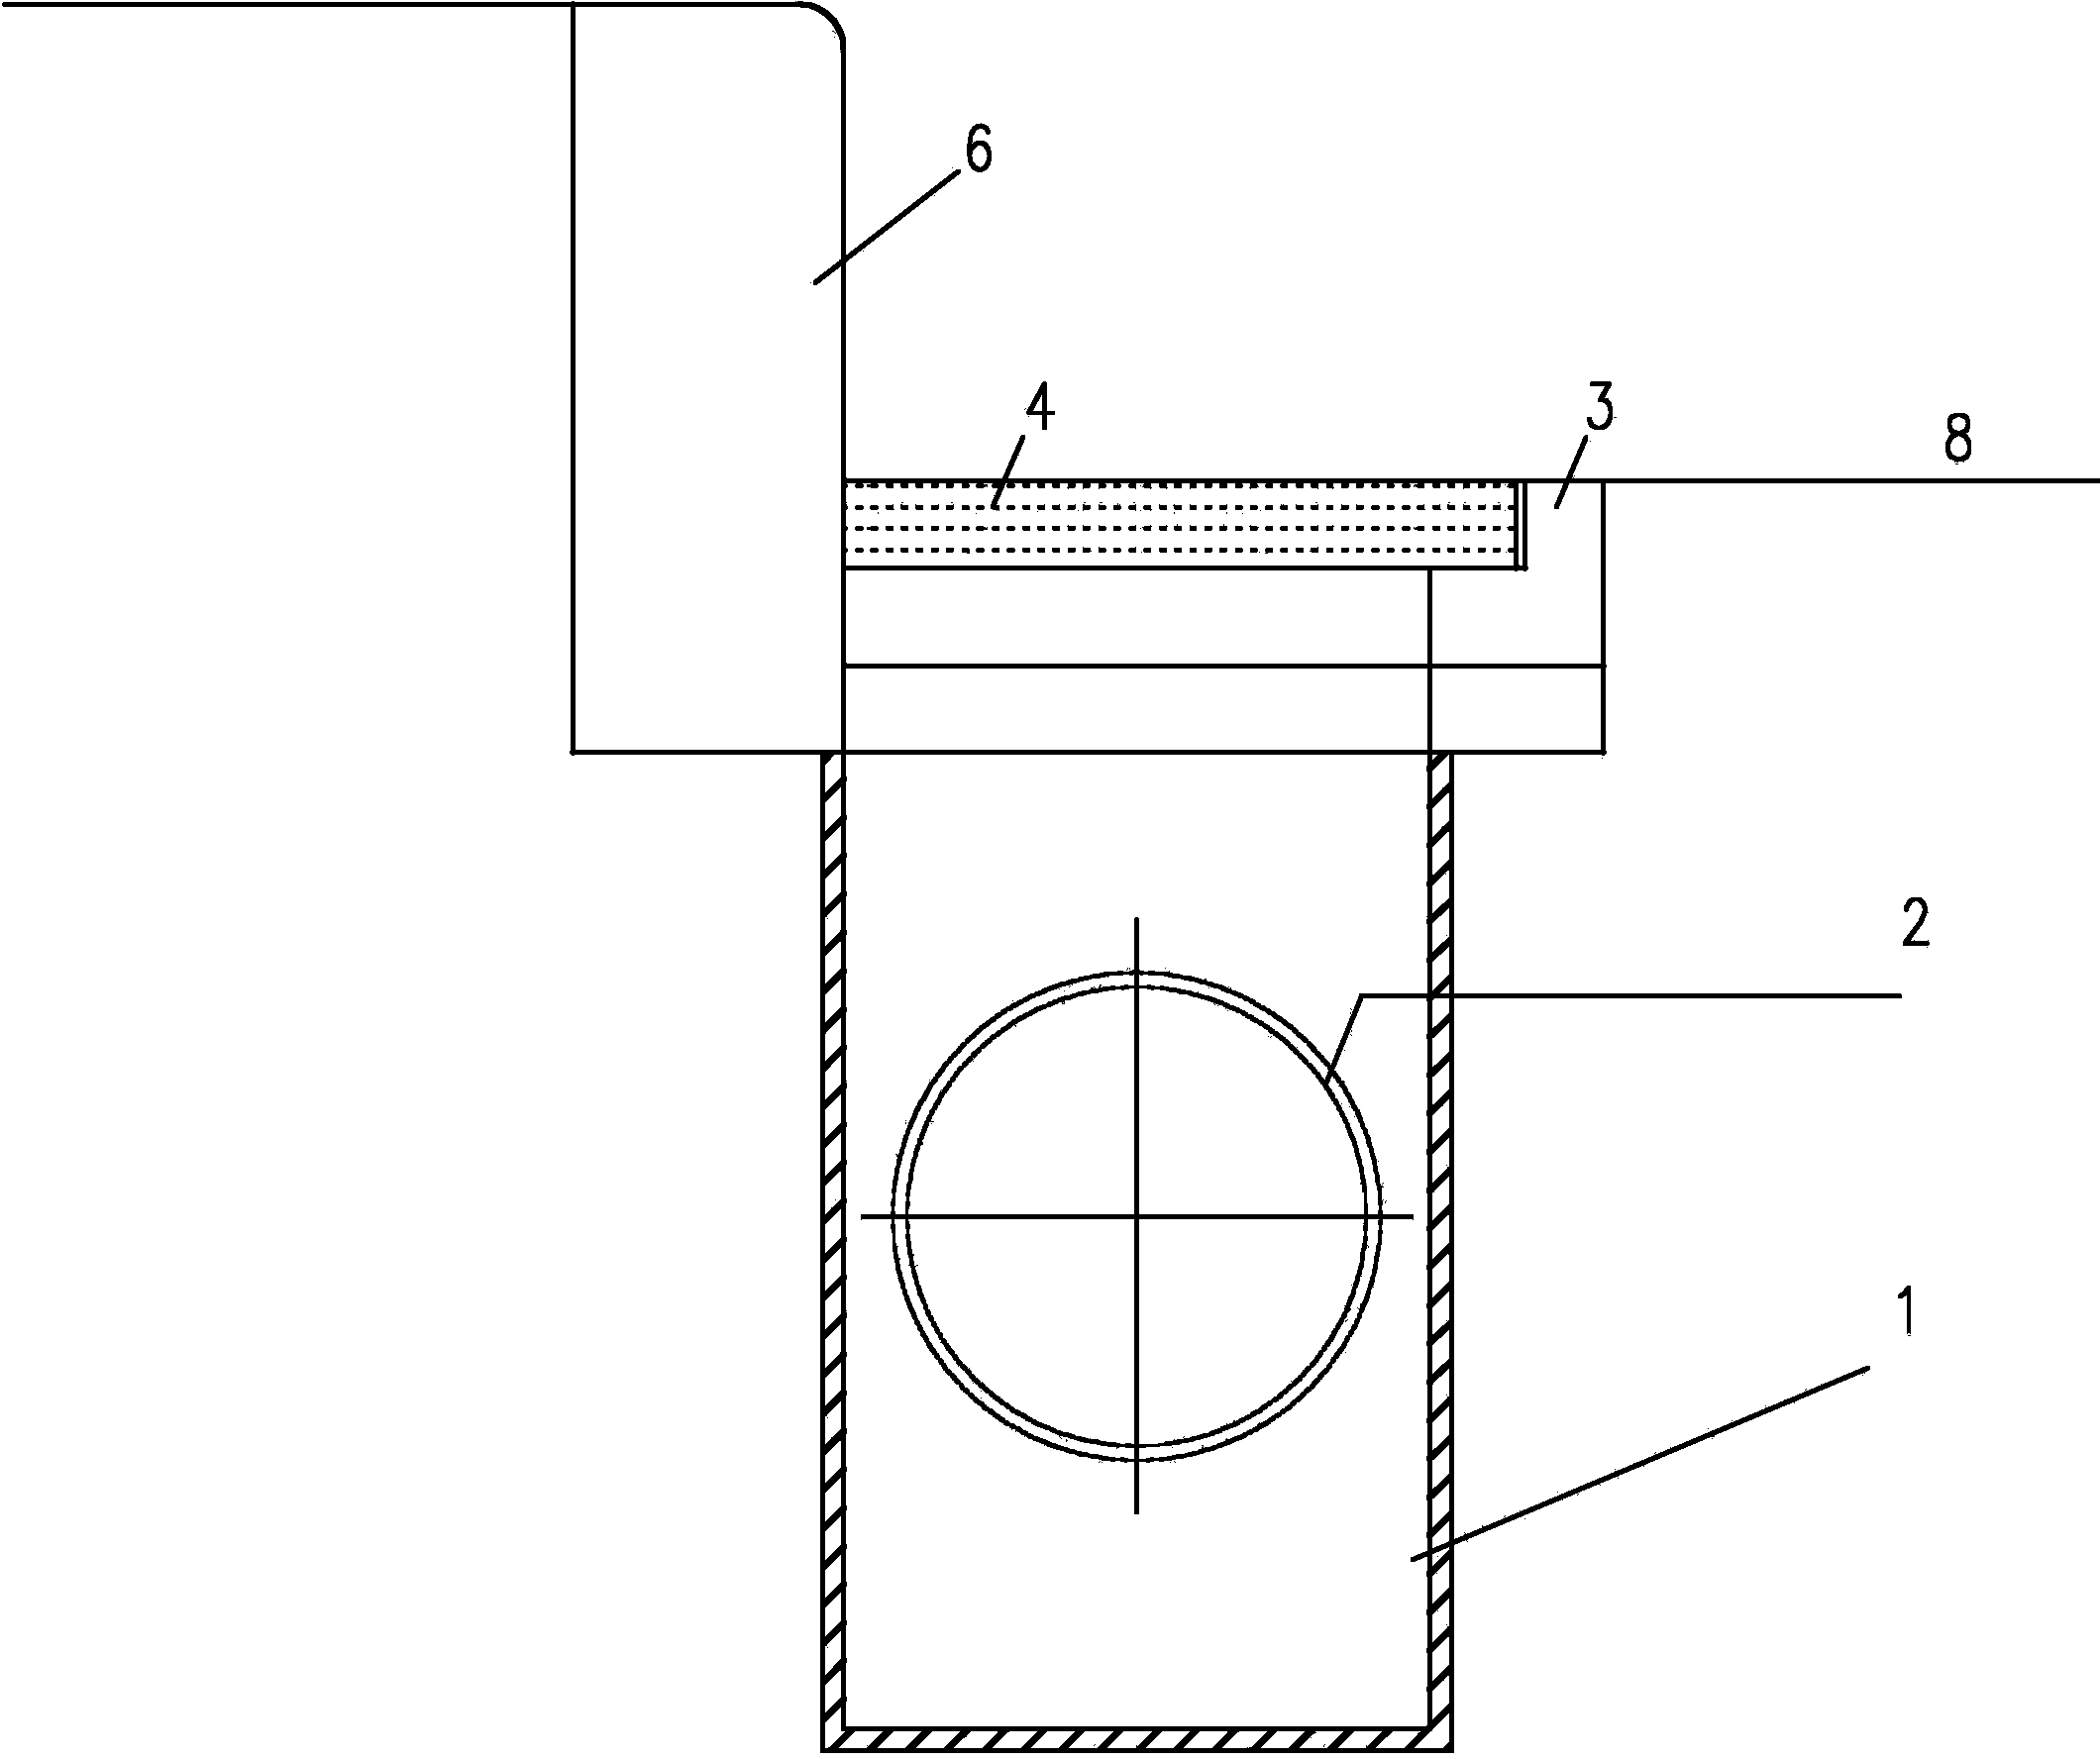 Novel catch-basin removing accumulated water on road surface and construction method